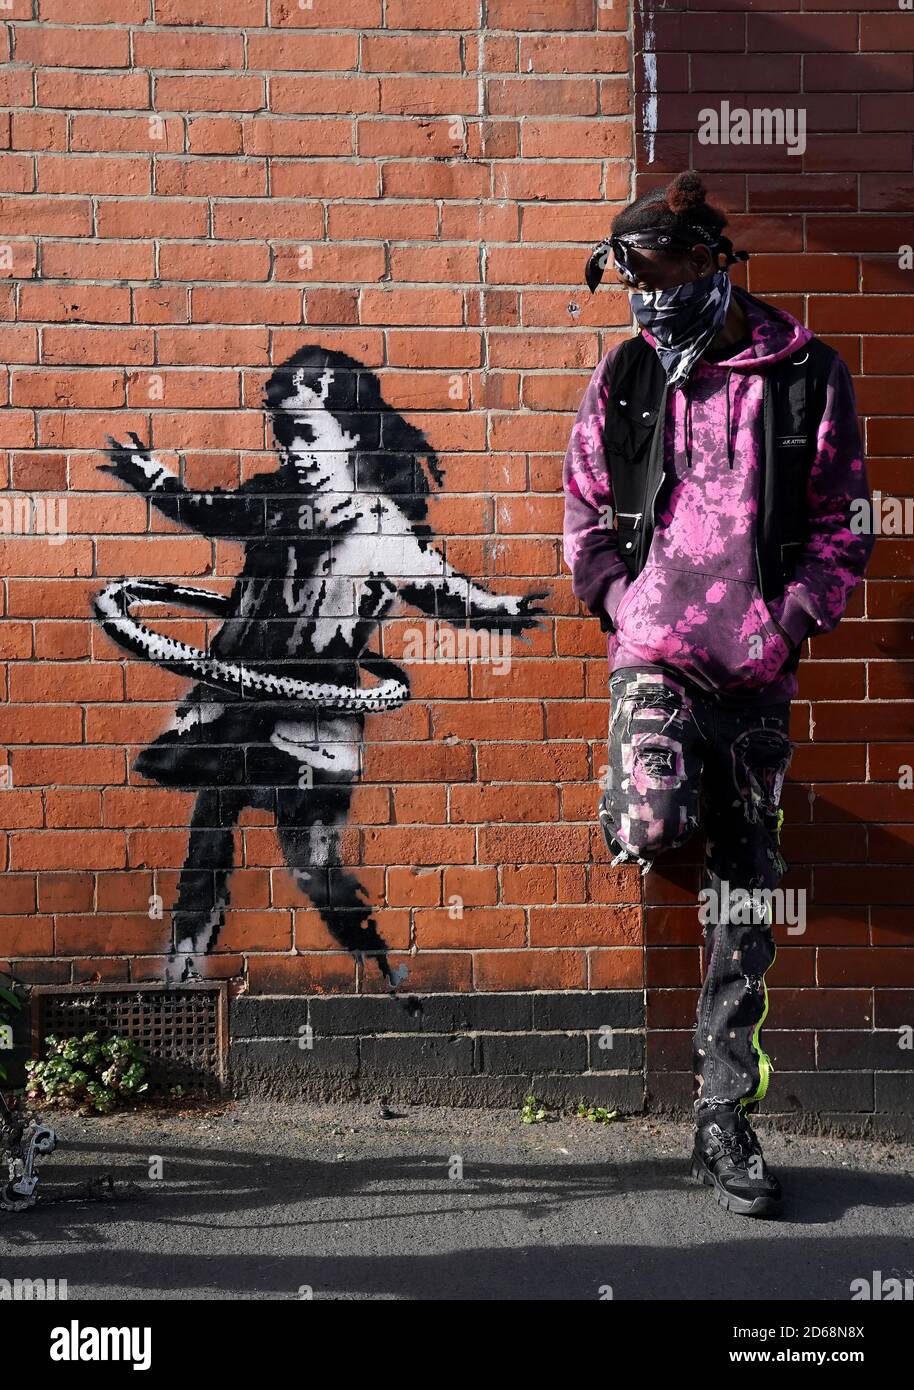 Nottingham resident Phidizz poses for a photograph next to graffiti artwork, now confirmed to be the work of street artist Banksy, on a side of a property at Rothesay AVenue and Ilkeston Road, Nottingham. The artwork depicts a young girl playing with a tyre and is painted on a wall near to an abandoned bicycle that is missing a wheel. Stock Photo